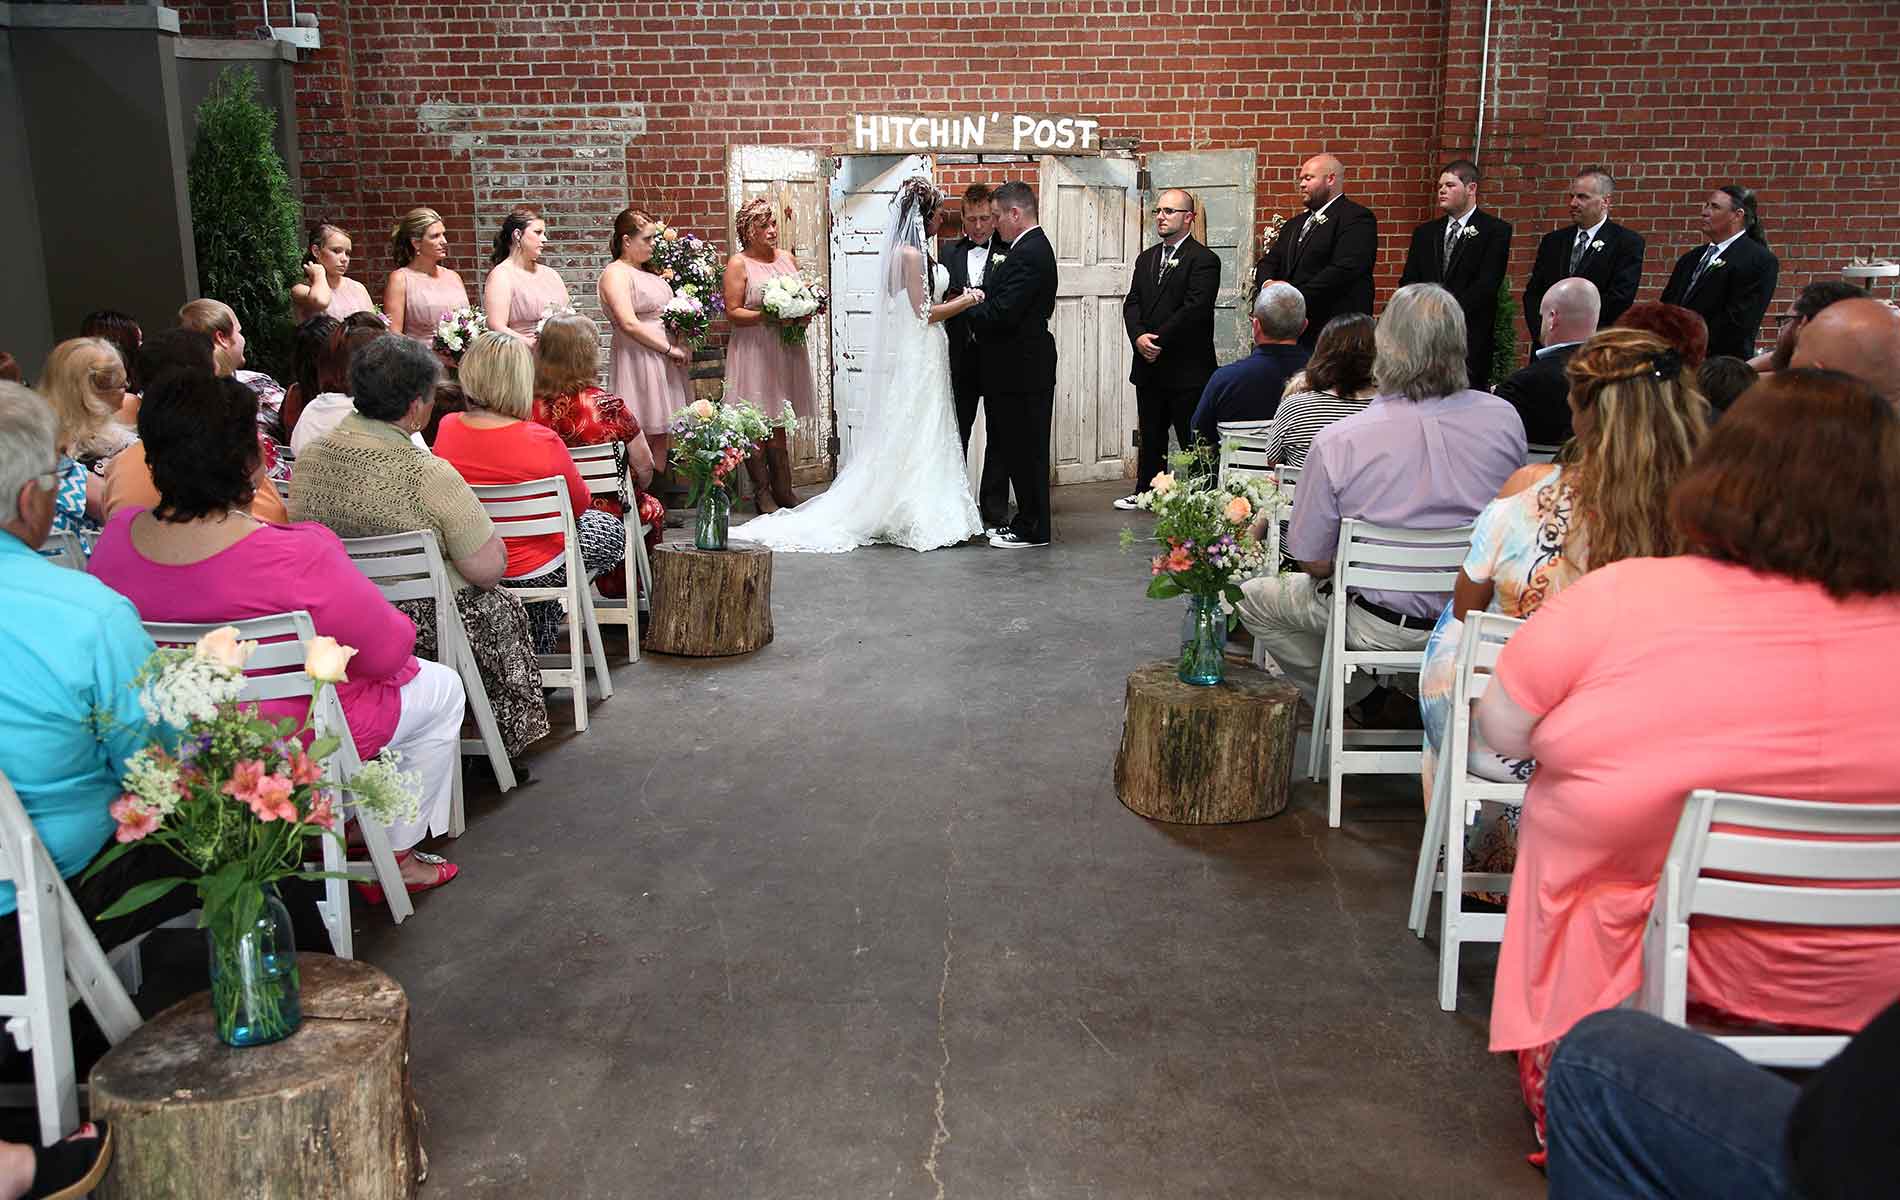 Voted the Best Wedding Venue and Special Events Facility in Kingsport, TN. Complete special events services include catering, entertainment and more.